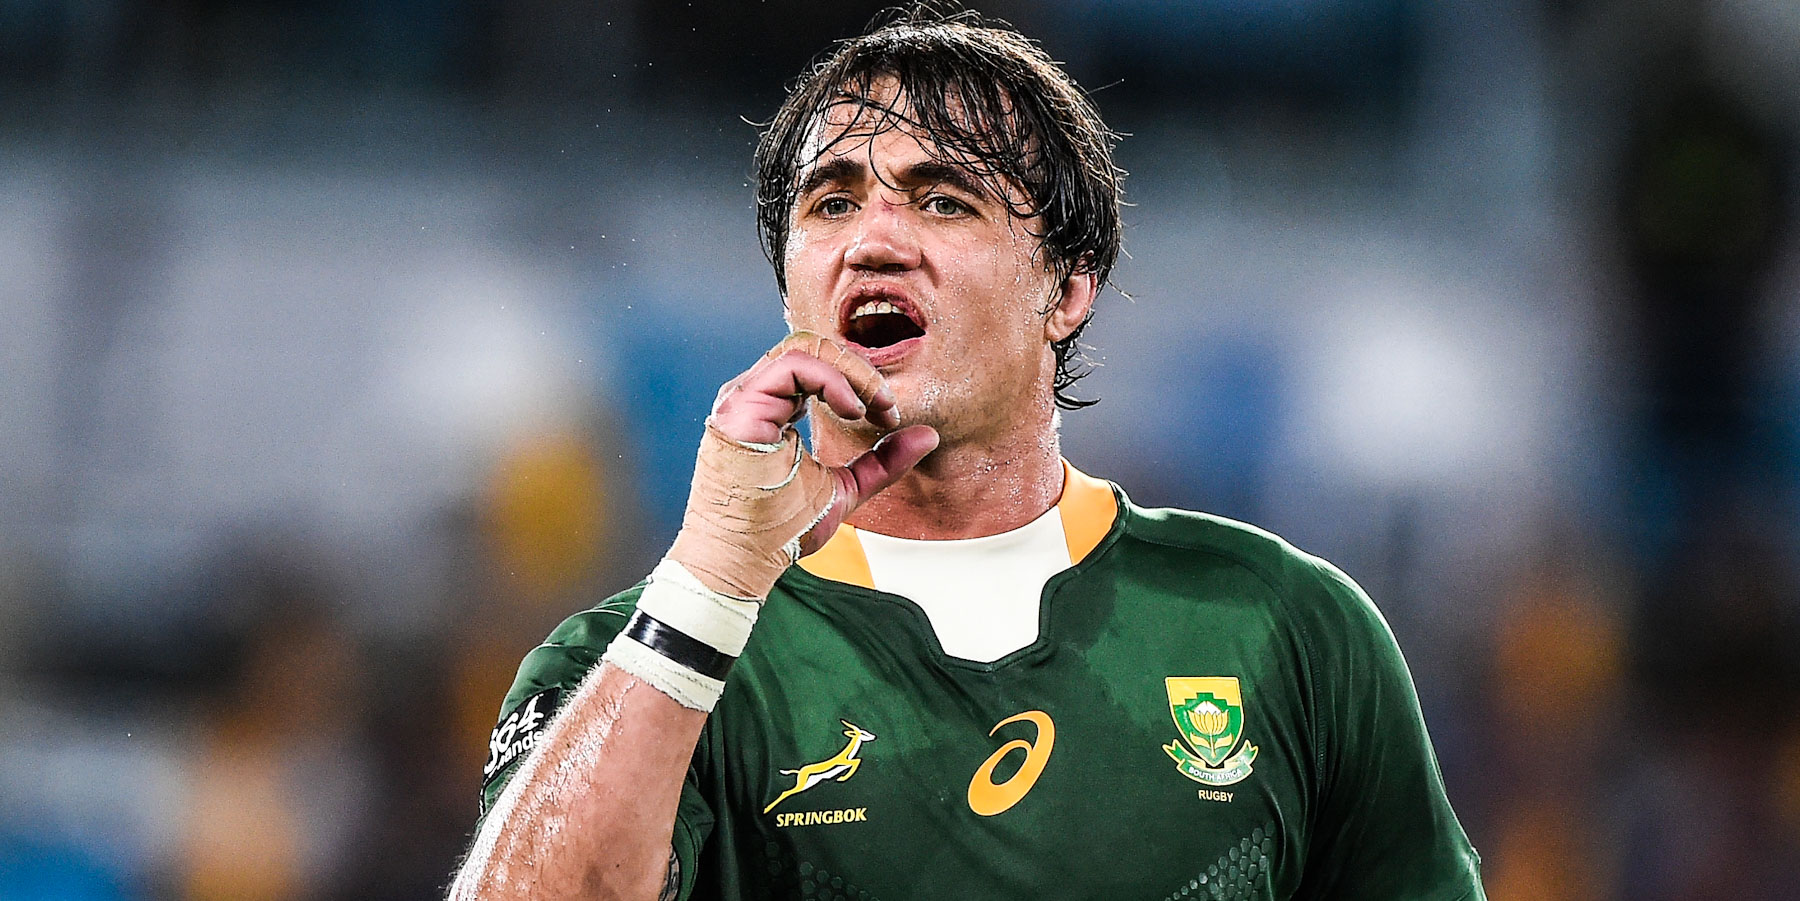 Franco Mostert takes over at lock from Lood de Jager for his 50th Test cap.